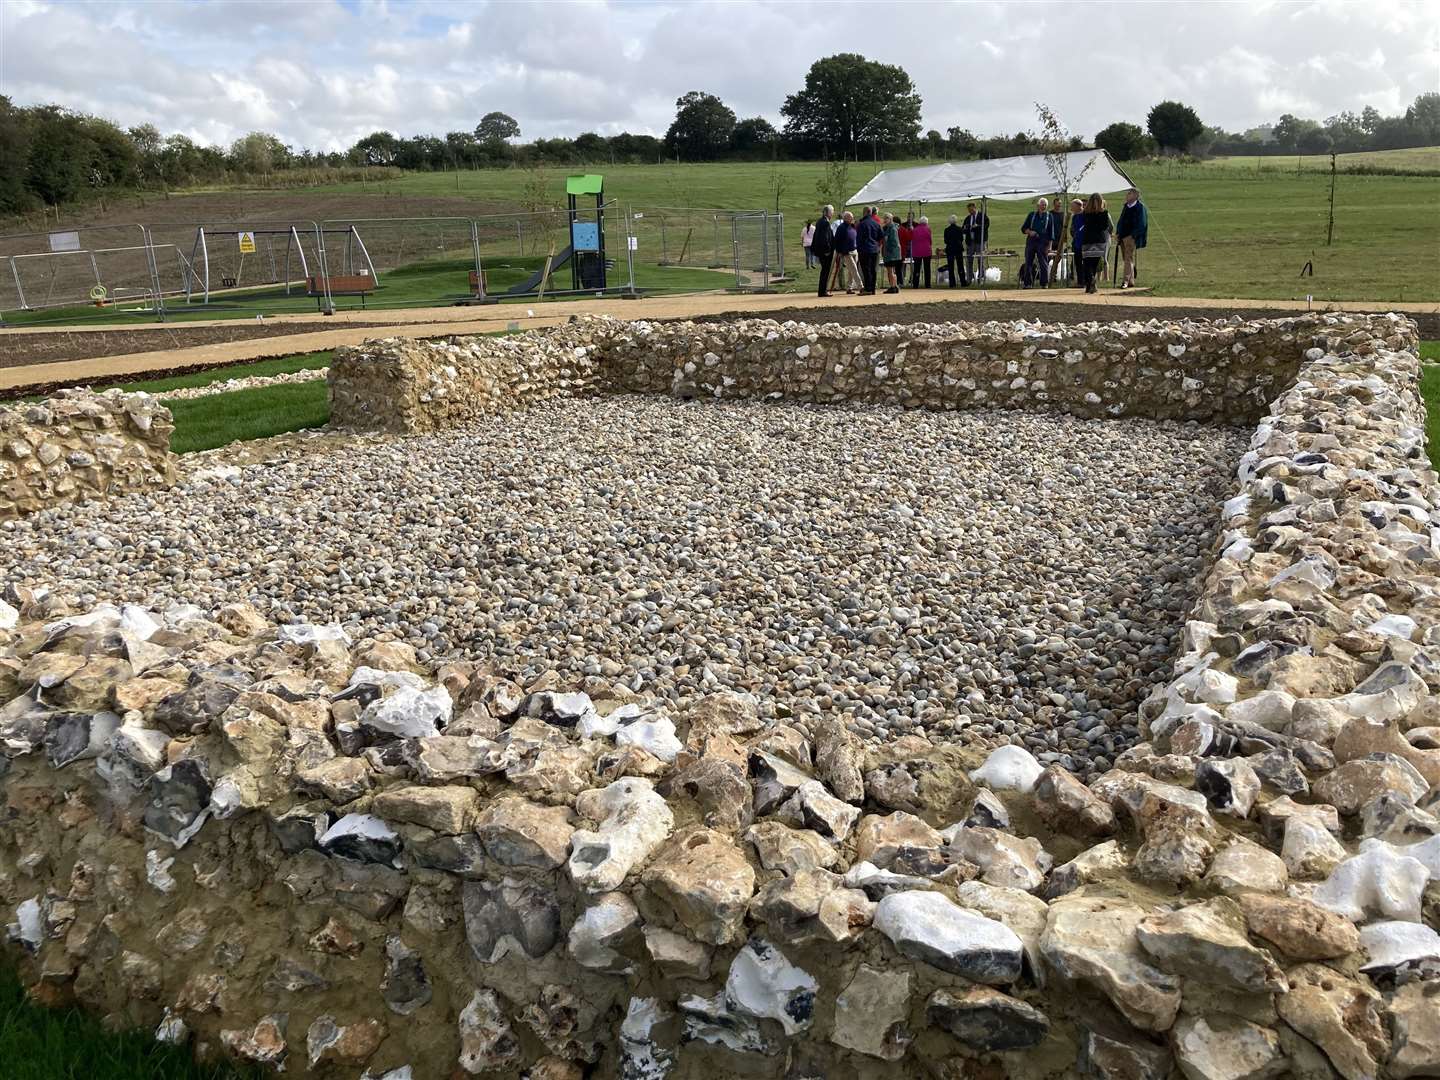 The recreation of the 2,000-year-old Romano-British temple discovered at Newington near Sittingbourne